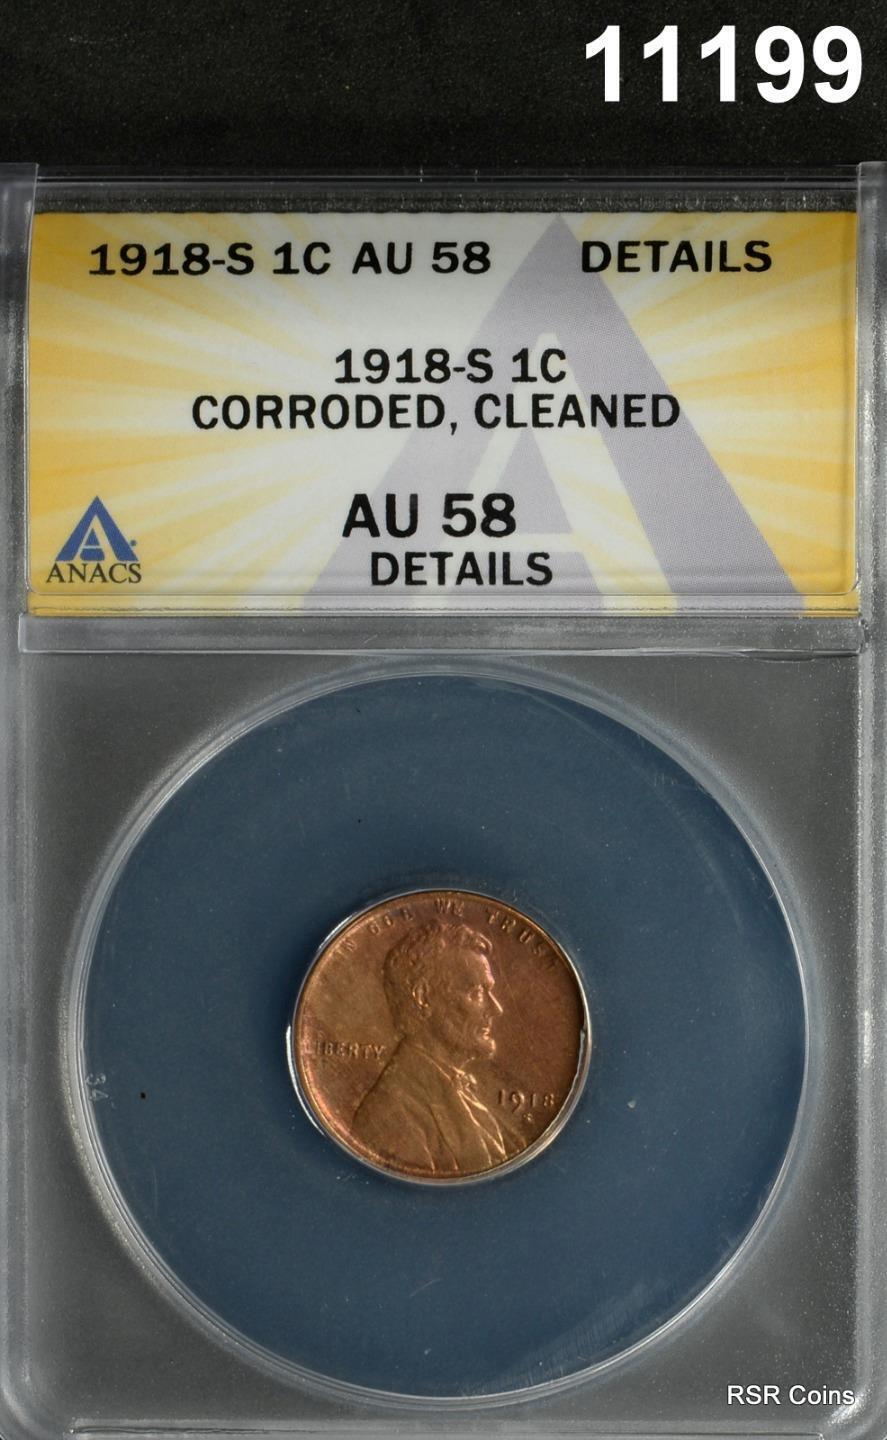 1918 S LINCOLN CENT ANACS CERTIFIED AU58 CORRODED CLEANED #11199